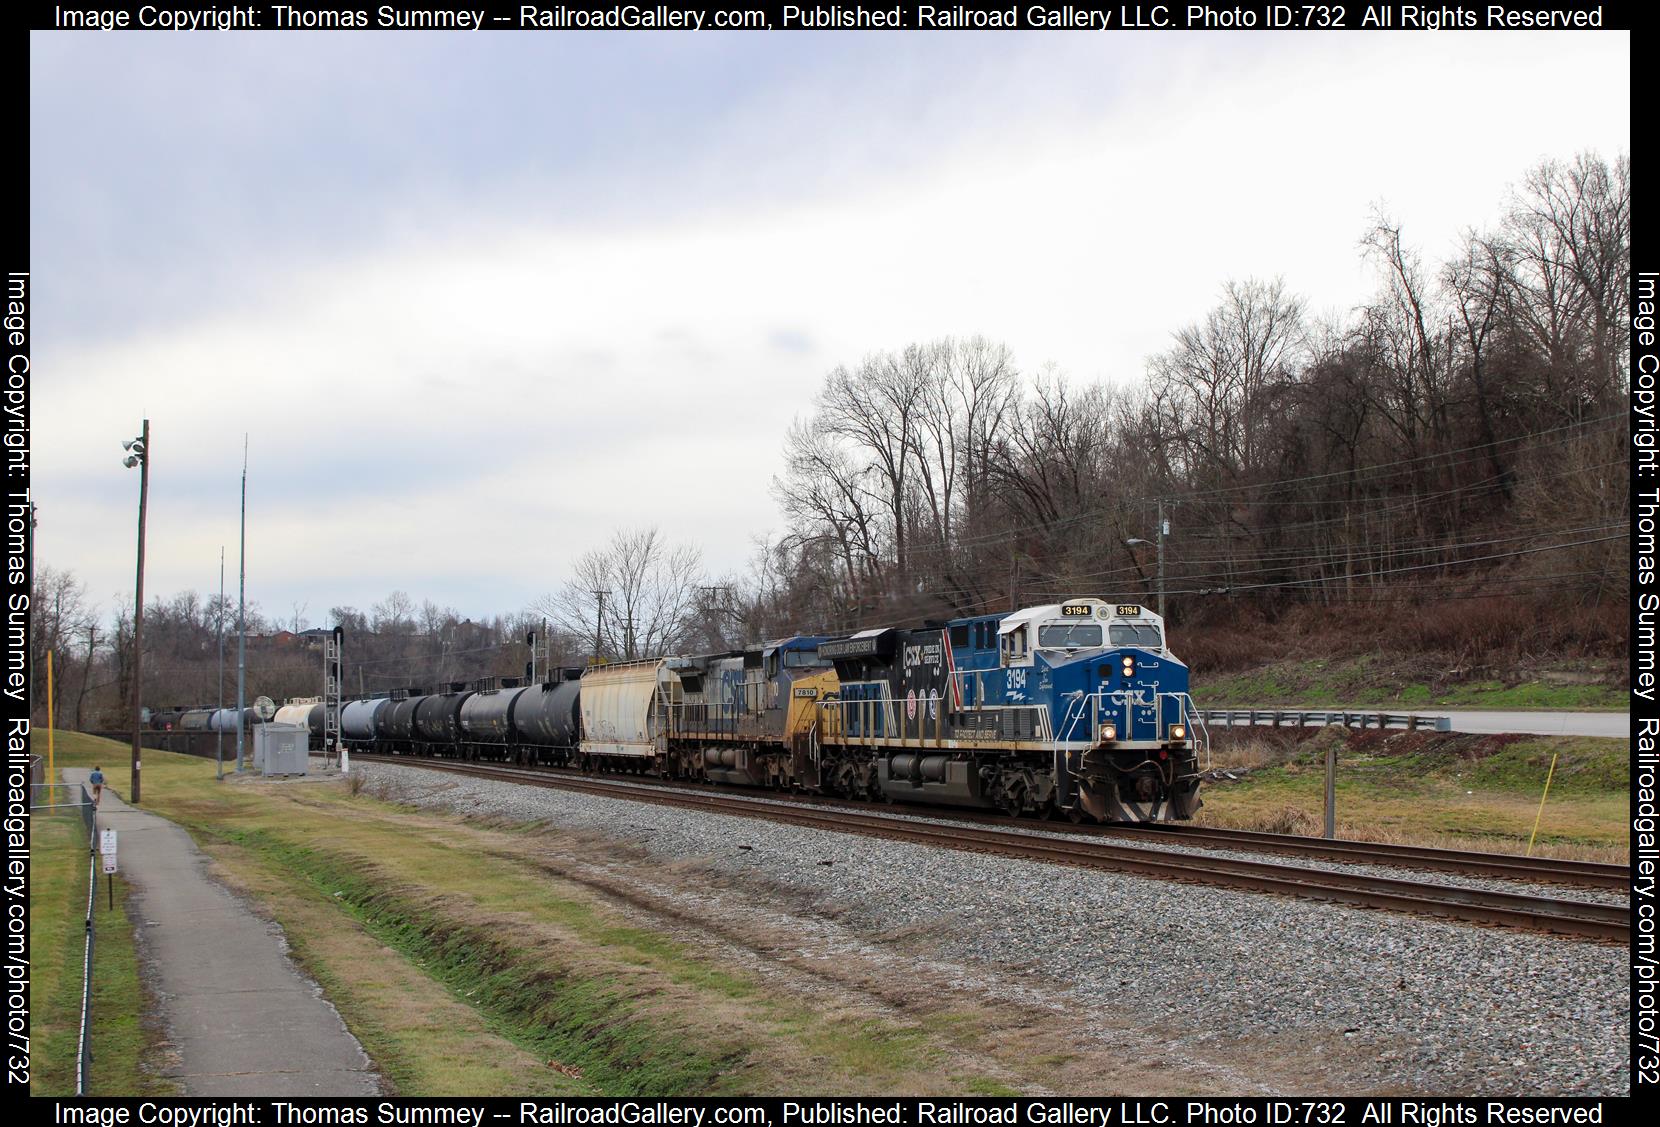 CSXT 3194 is a class GE ES44AC and  is pictured in Catlettsburg, Kentucky, United States.  This was taken along the CSXT Big Sandy Subdivision on the CSX Transportation. Photo Copyright: Thomas Summey uploaded to Railroad Gallery on 02/22/2023. This photograph of CSXT 3194 was taken on Monday, January 16, 2023. All Rights Reserved. 